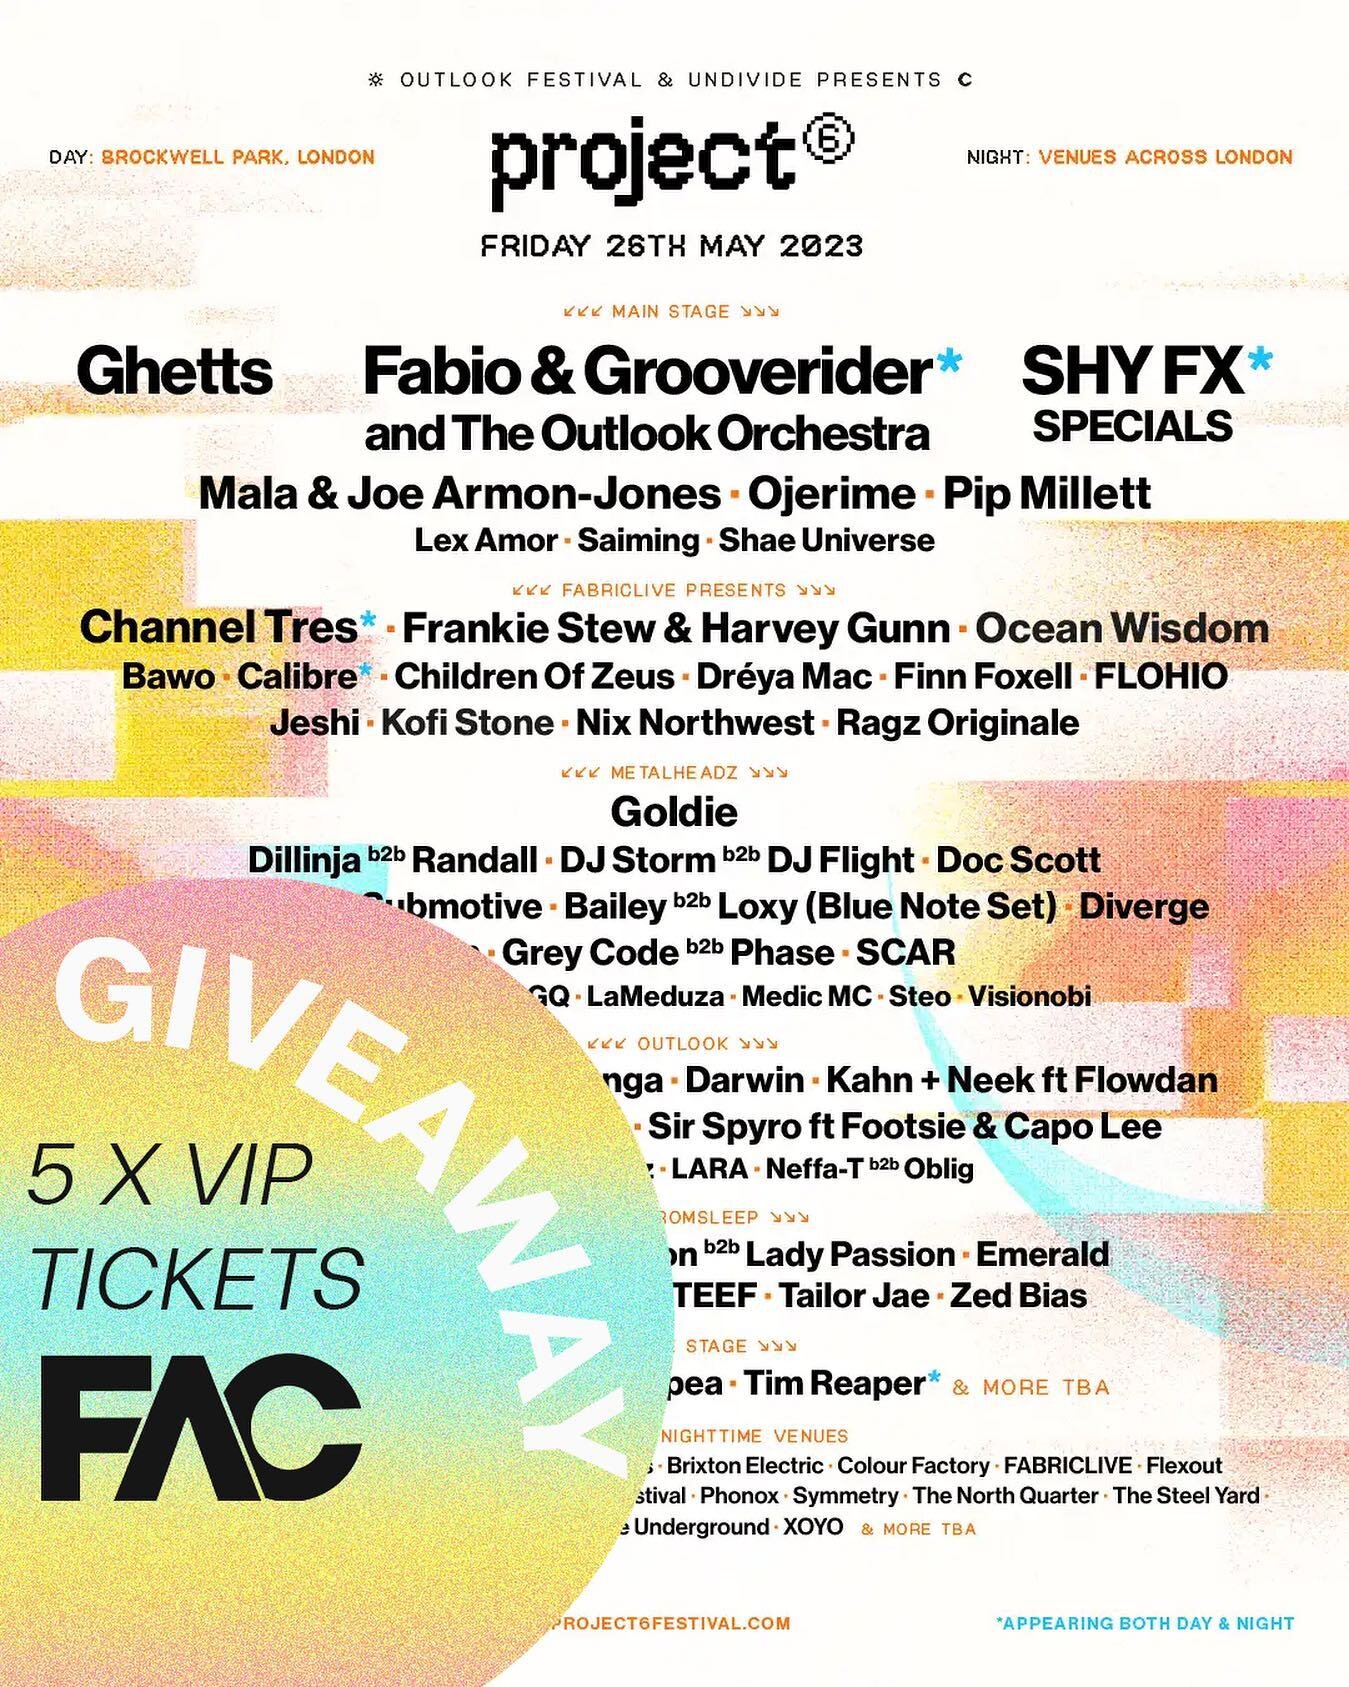 🎶 GIVEAWAY ☀️

We've teamed up with @project6festival to give our members a chance to win 5xVIP tickets to their brand new festival next Friday 26th May.

Like this post, make sure you&rsquo;re a member and enter the giveaway via the links in bio. ?